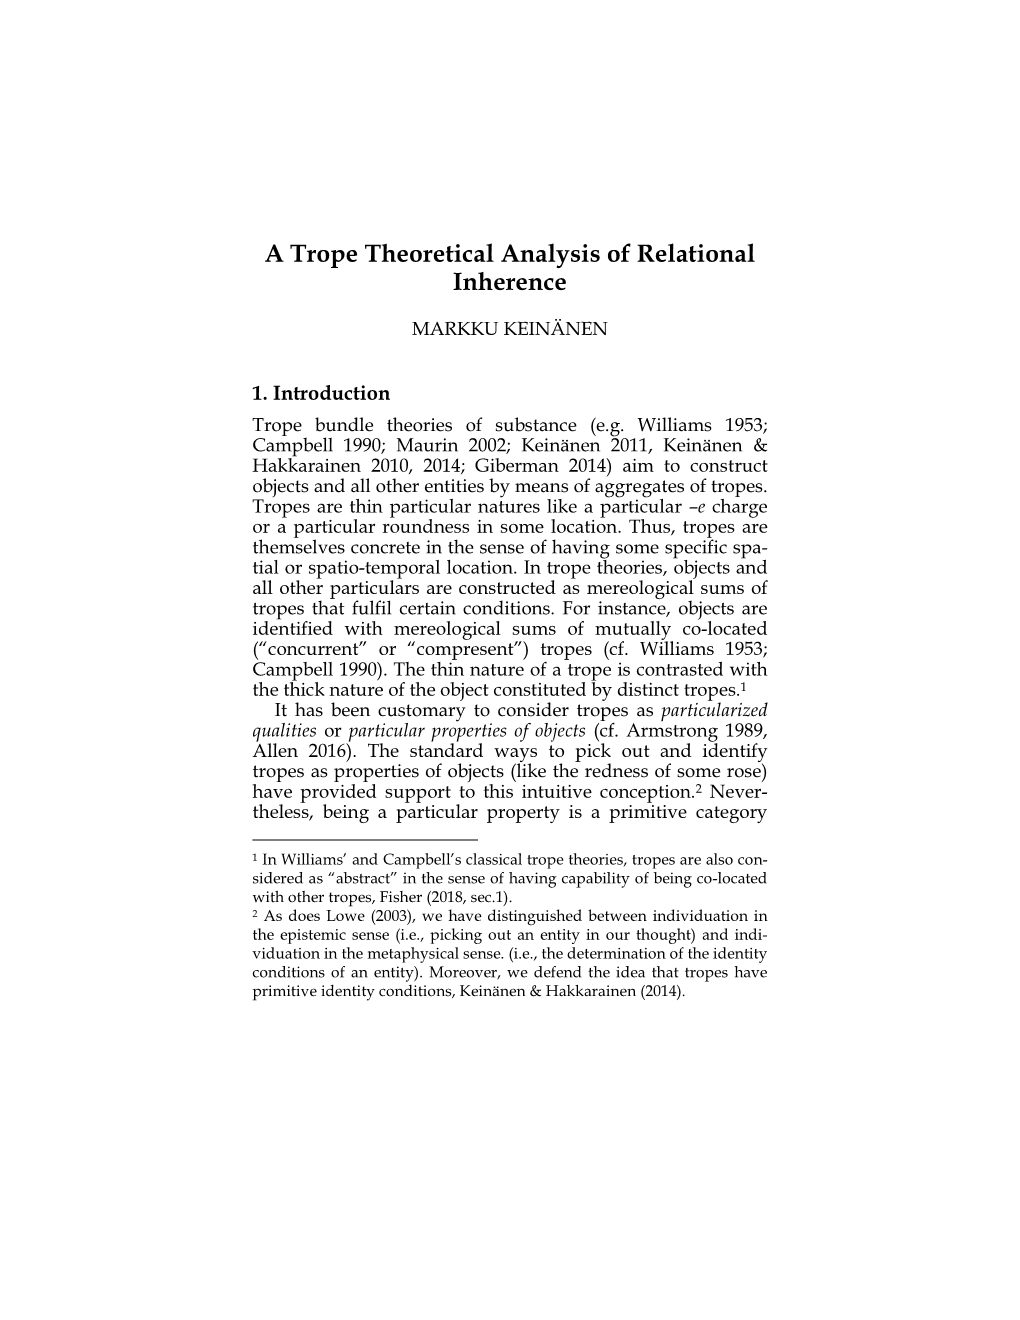 A Trope Theoretical Analysis of Relational Inherence